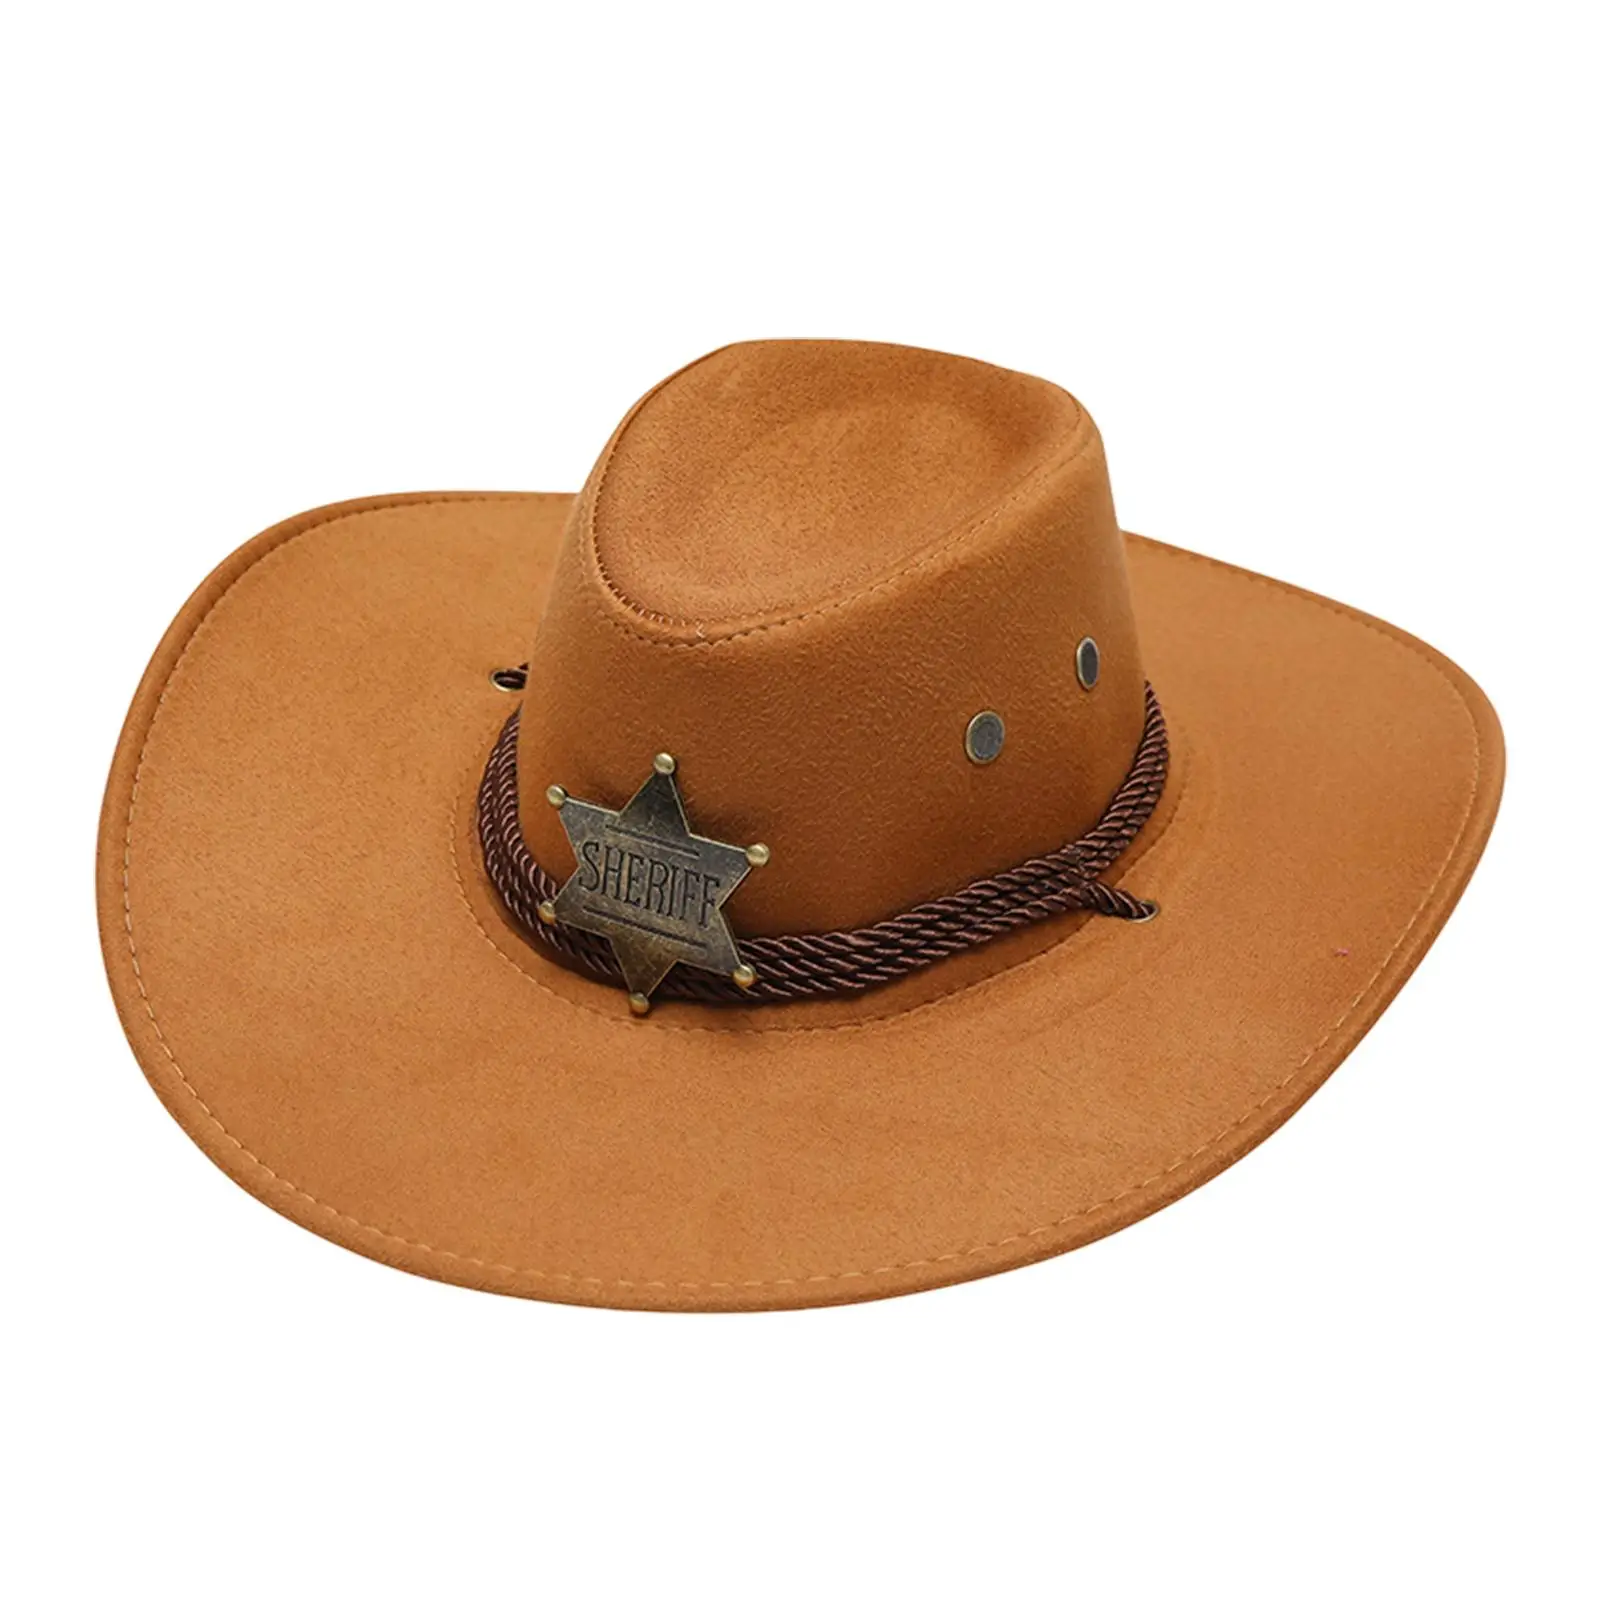 Western  Hat Comfortable Lightweight Unisex with Adjustable Chin Strap Sunhat for Beach Holidays Travel Festivals Carnival